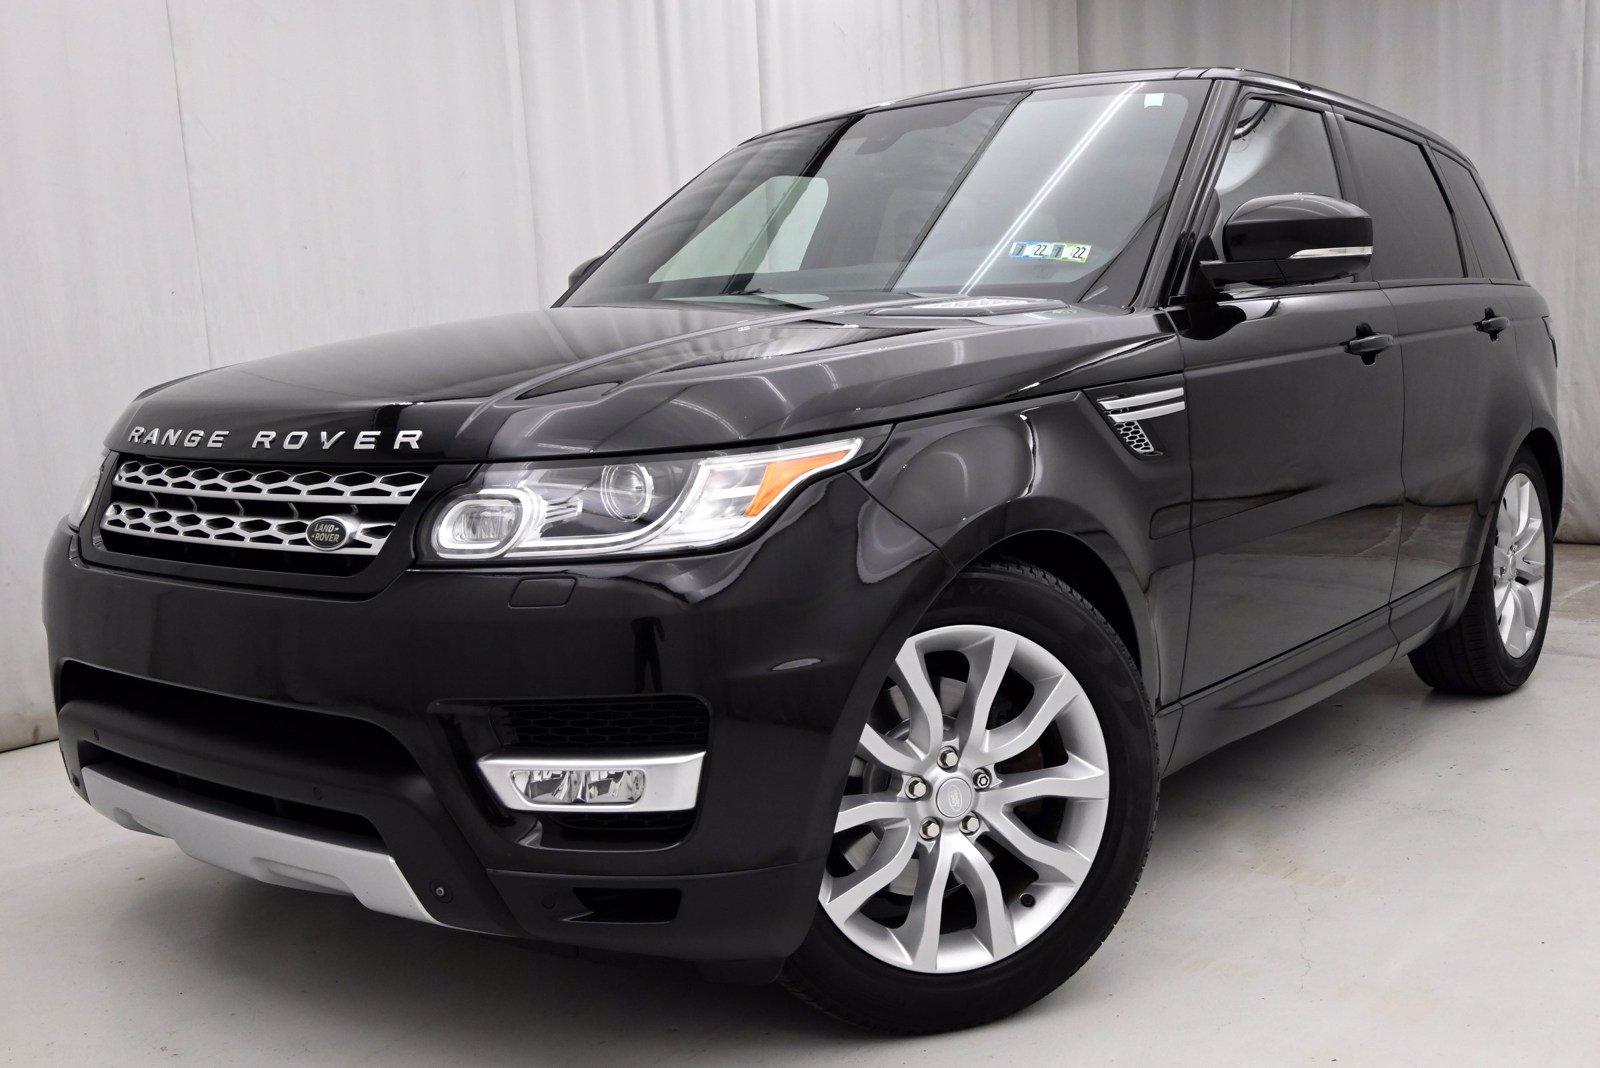 rommel web Beperkingen Used 2015 Land Rover Range Rover Sport HSE For Sale (Sold) | Motorcars of  the Main Line Stock #A619953